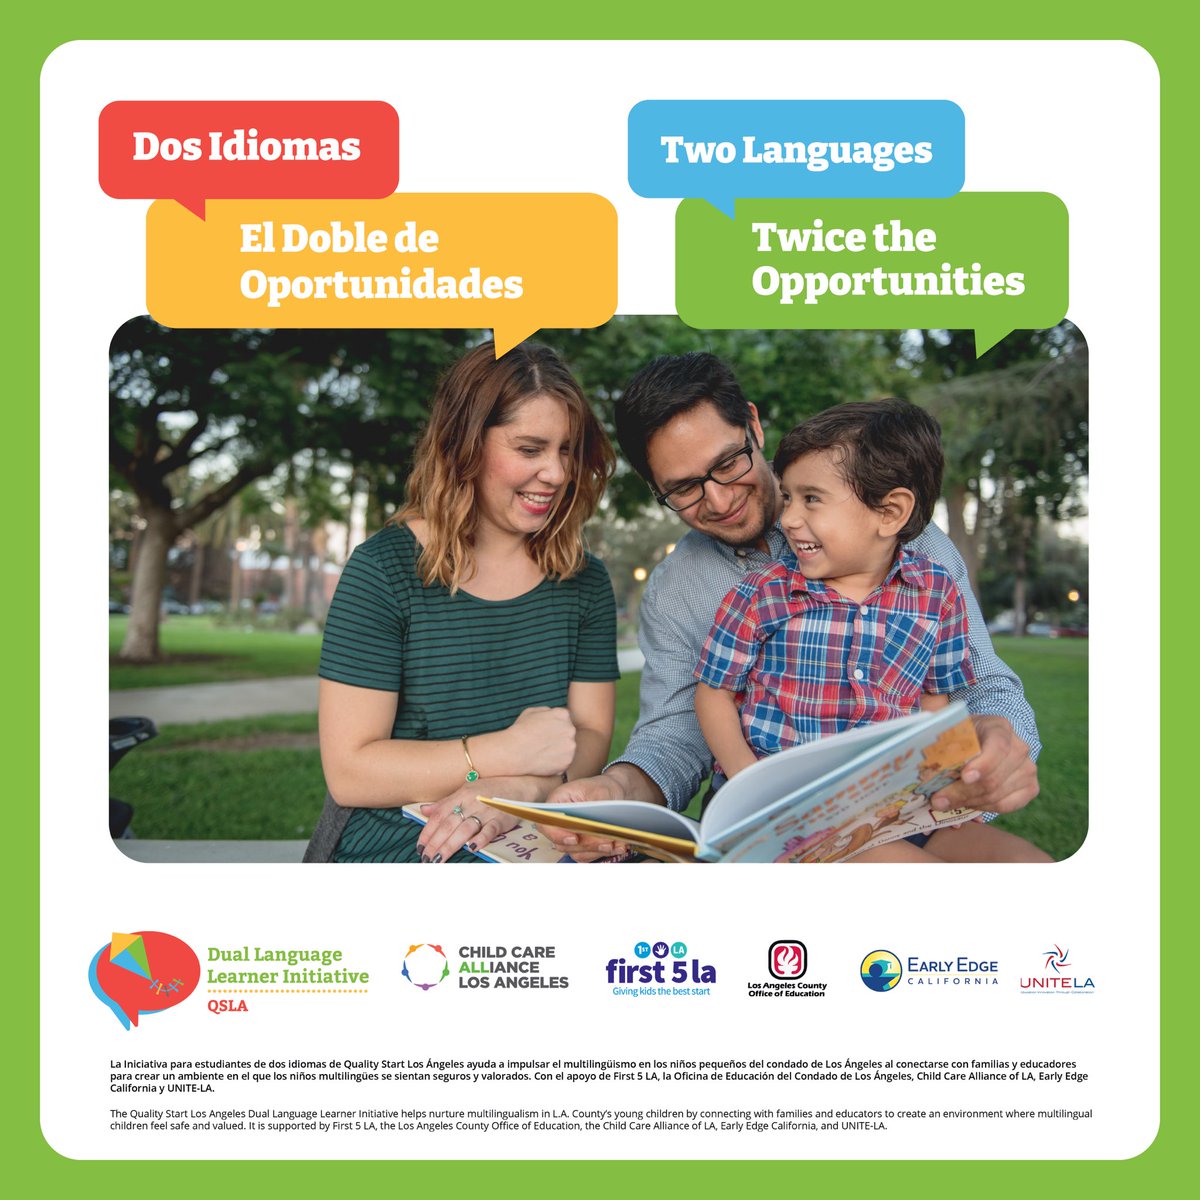 Being multilingual can lead to improved academic and social emotional abilities, more career opportunities, and better financial outcomes in your children’s lives. Learn more at qualitystartla.org #DualLanguageLearnersInLA